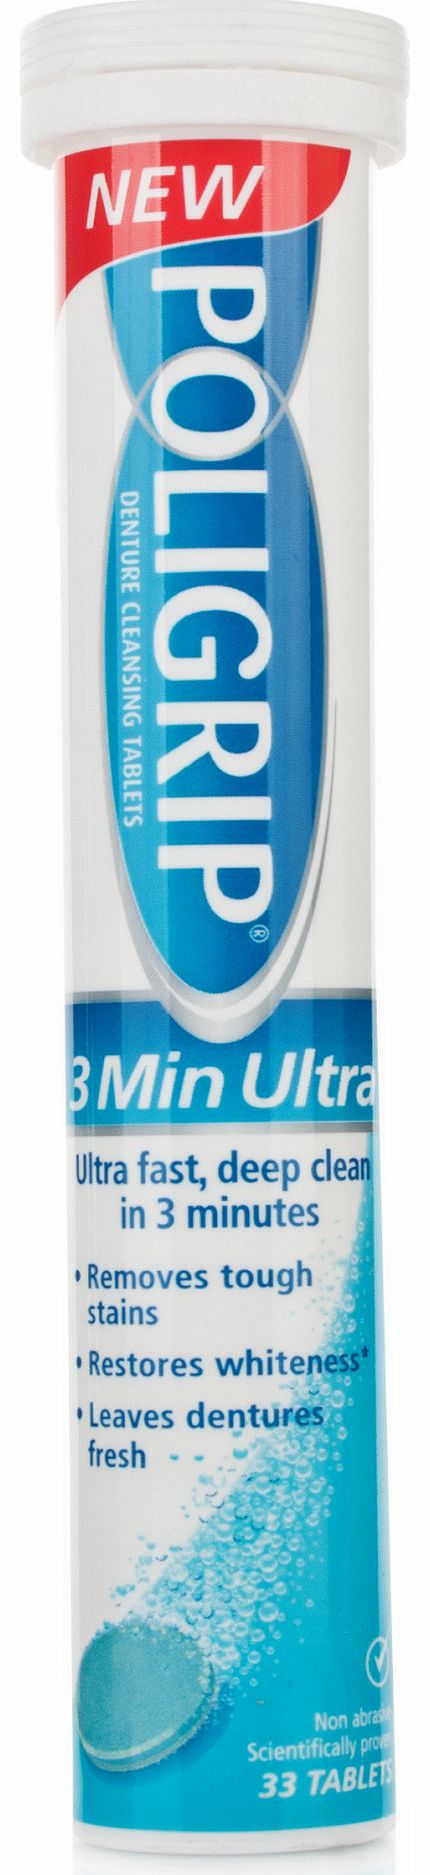 3 Minute Ultra Deep Clean Tablets